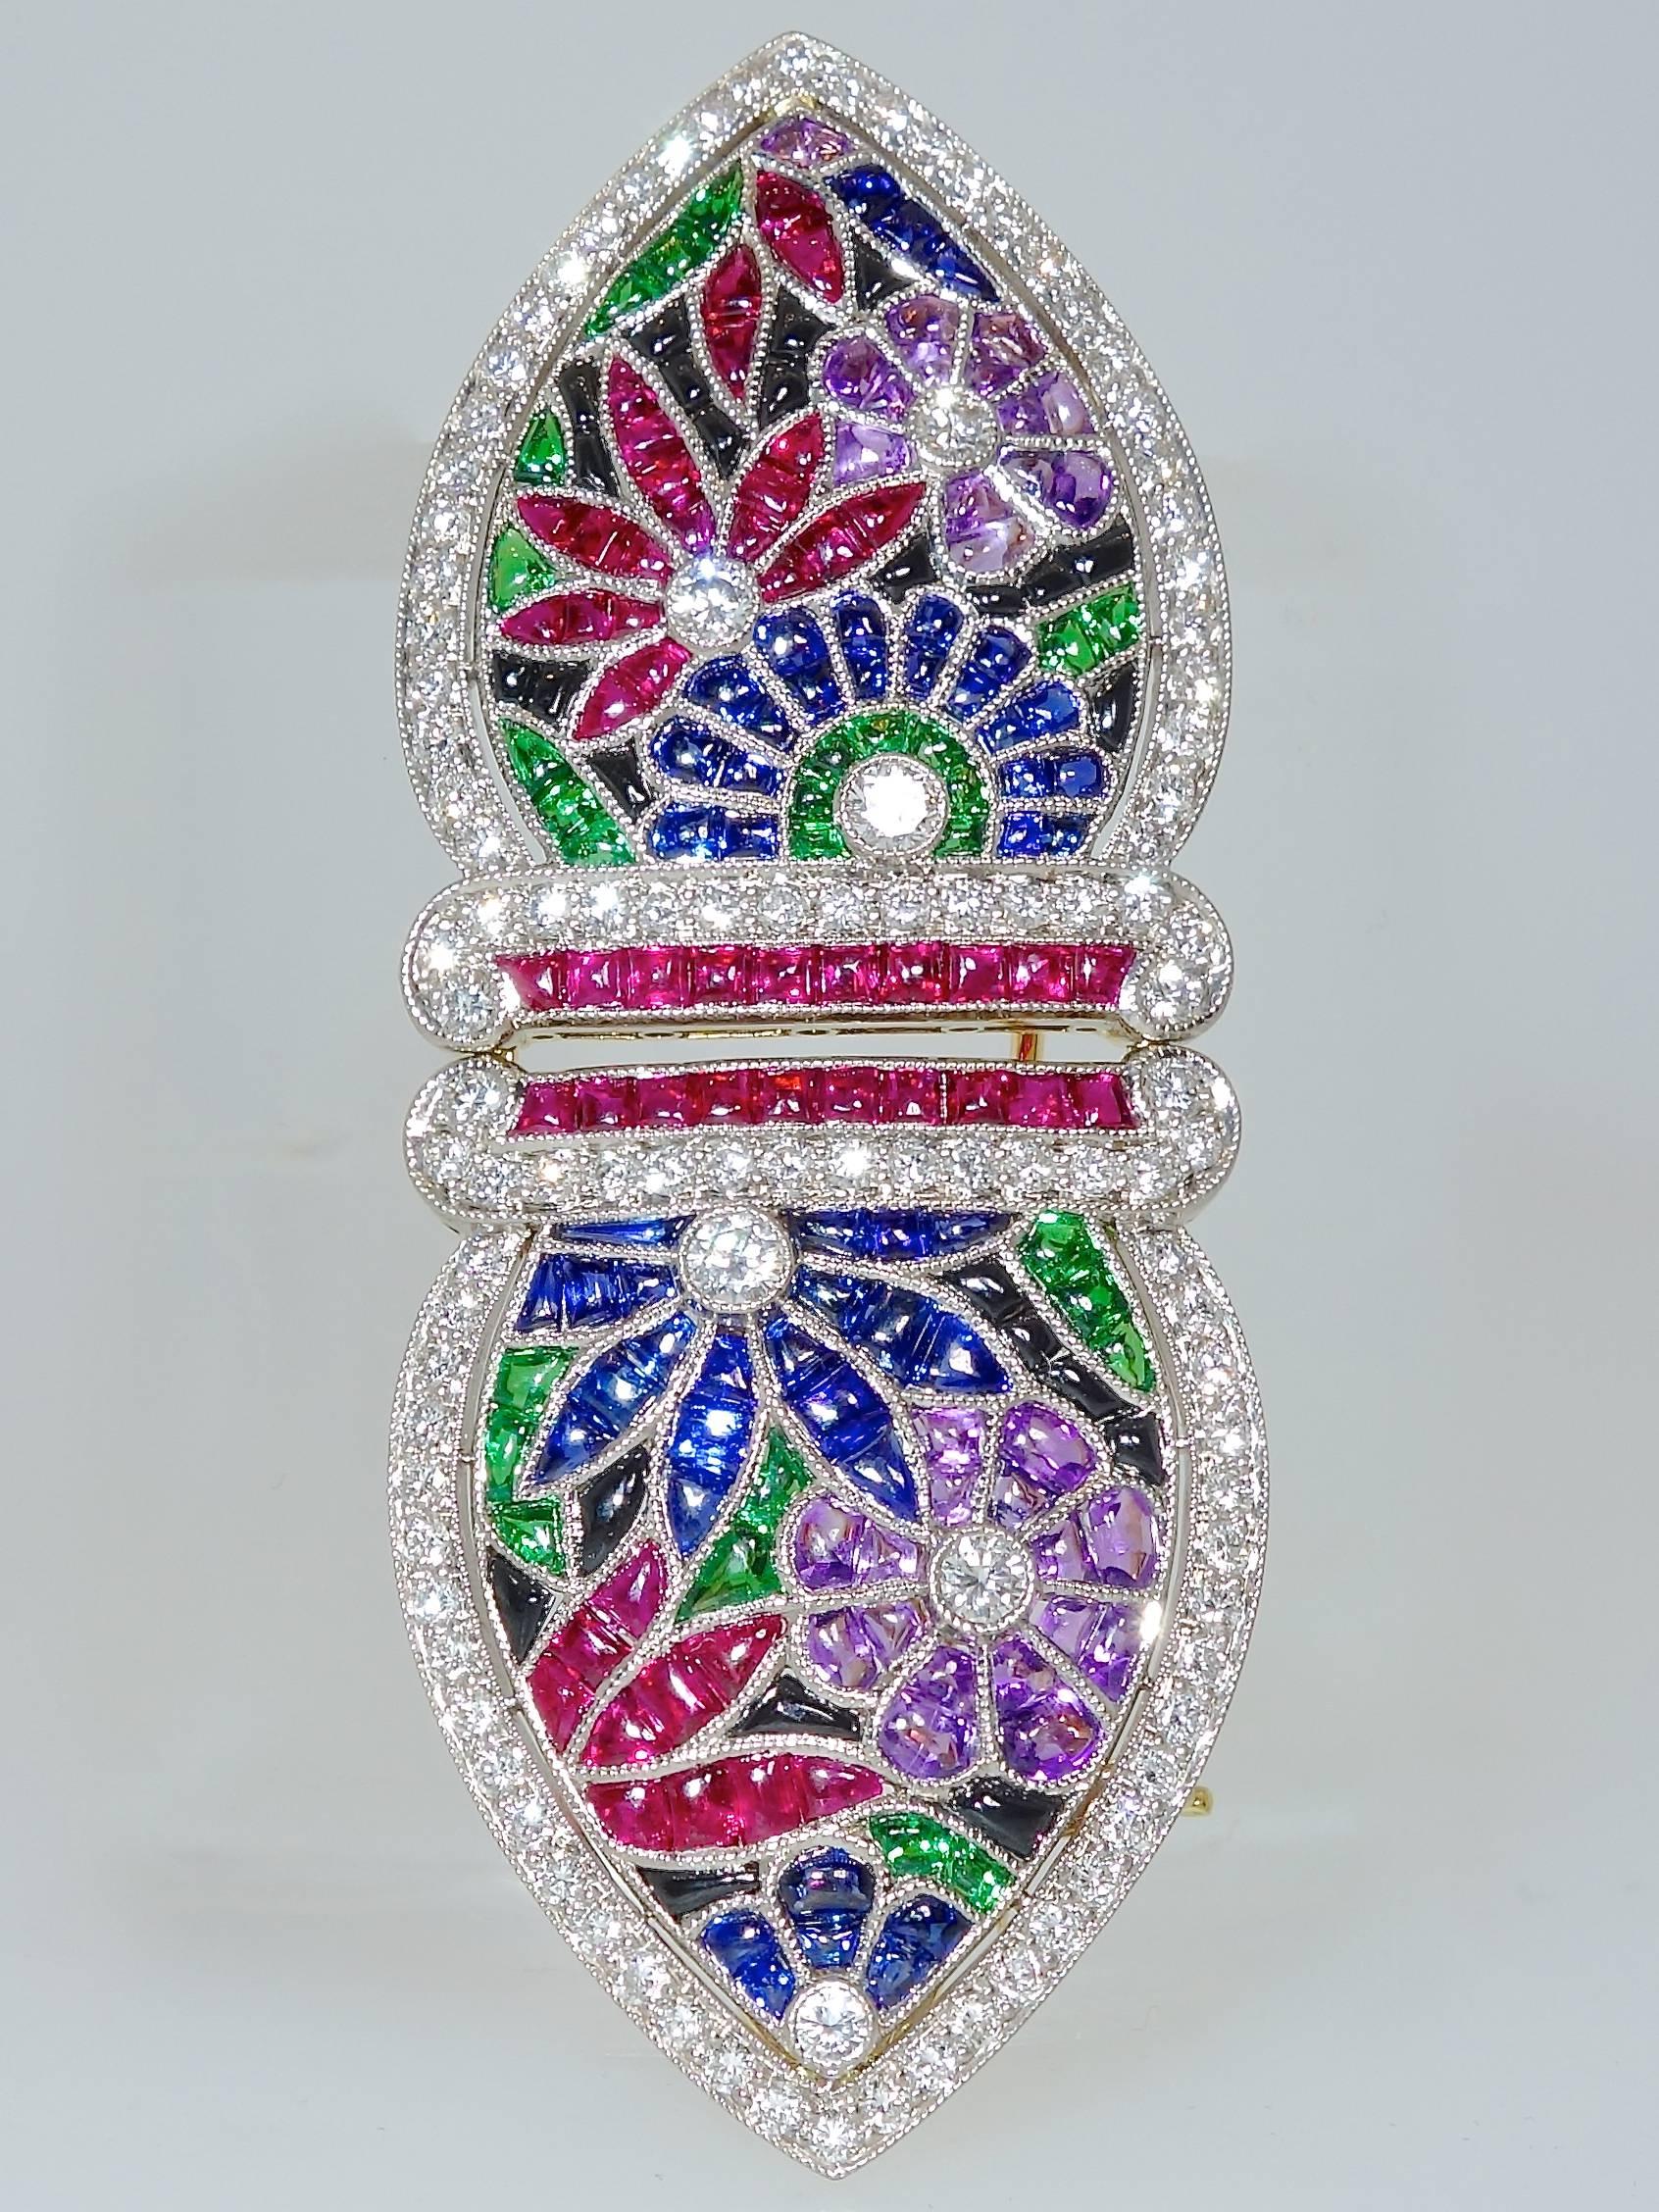 Buff topped, faceted bottom, fine bright gem stones: rubies, sapphires, emeralds, onyxes, amethysts and white brilliant cut diamonds. 2.75 inches long.  Millgrained bezels in 18K white and yellow gold finish the description of the mechanics of this